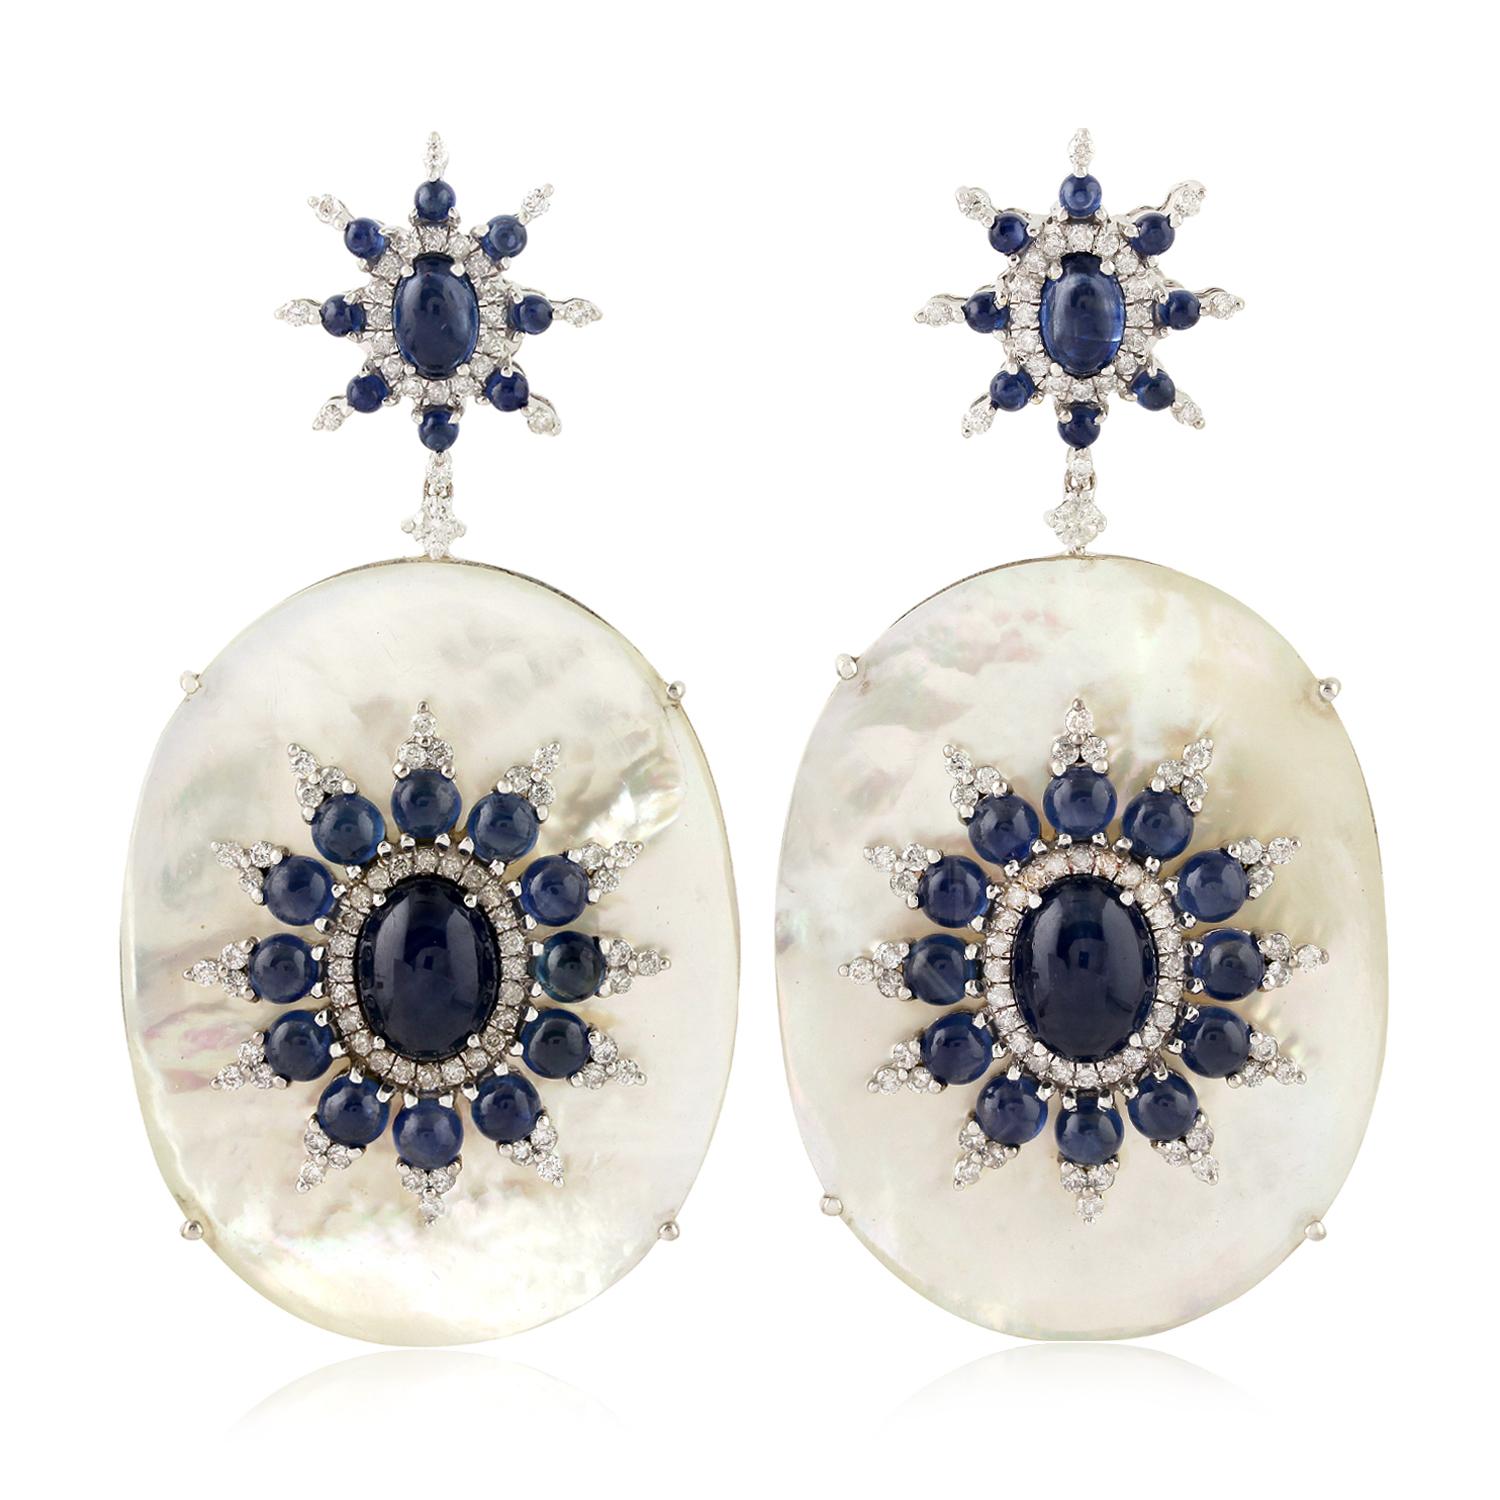 18k White Gold Diamond 13.92ct Sapphire 43.7ct Mother of Pearl Dangle Earrings

1.5ct carats of White round cut diamonds, mother of pearl, and blue sapphire set in 18k White Gold Dangle Earrings.

We guarantee all products sold and our number one